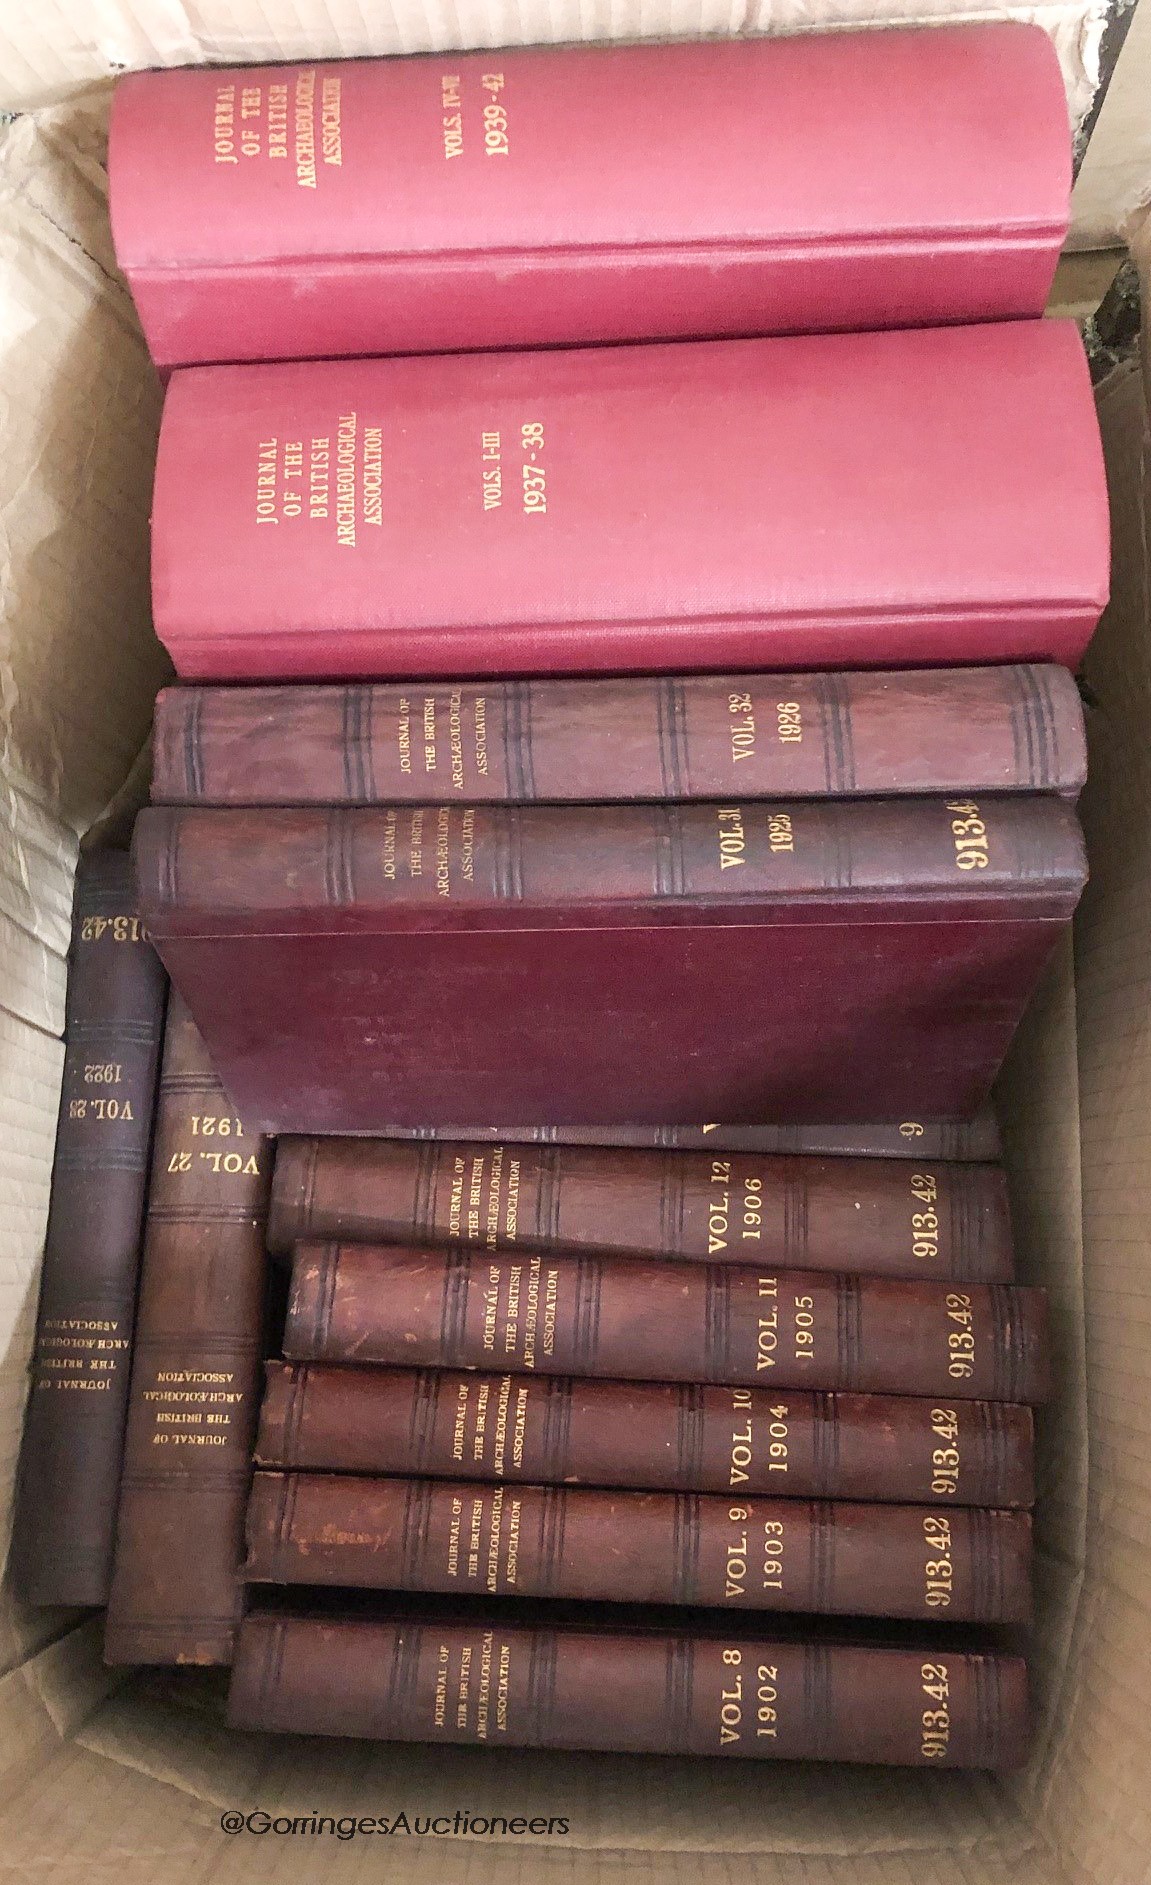 Journal of the British Archaeological Association, mid 19th to early 20th century, approx. 80 volumes                                                                                                                       